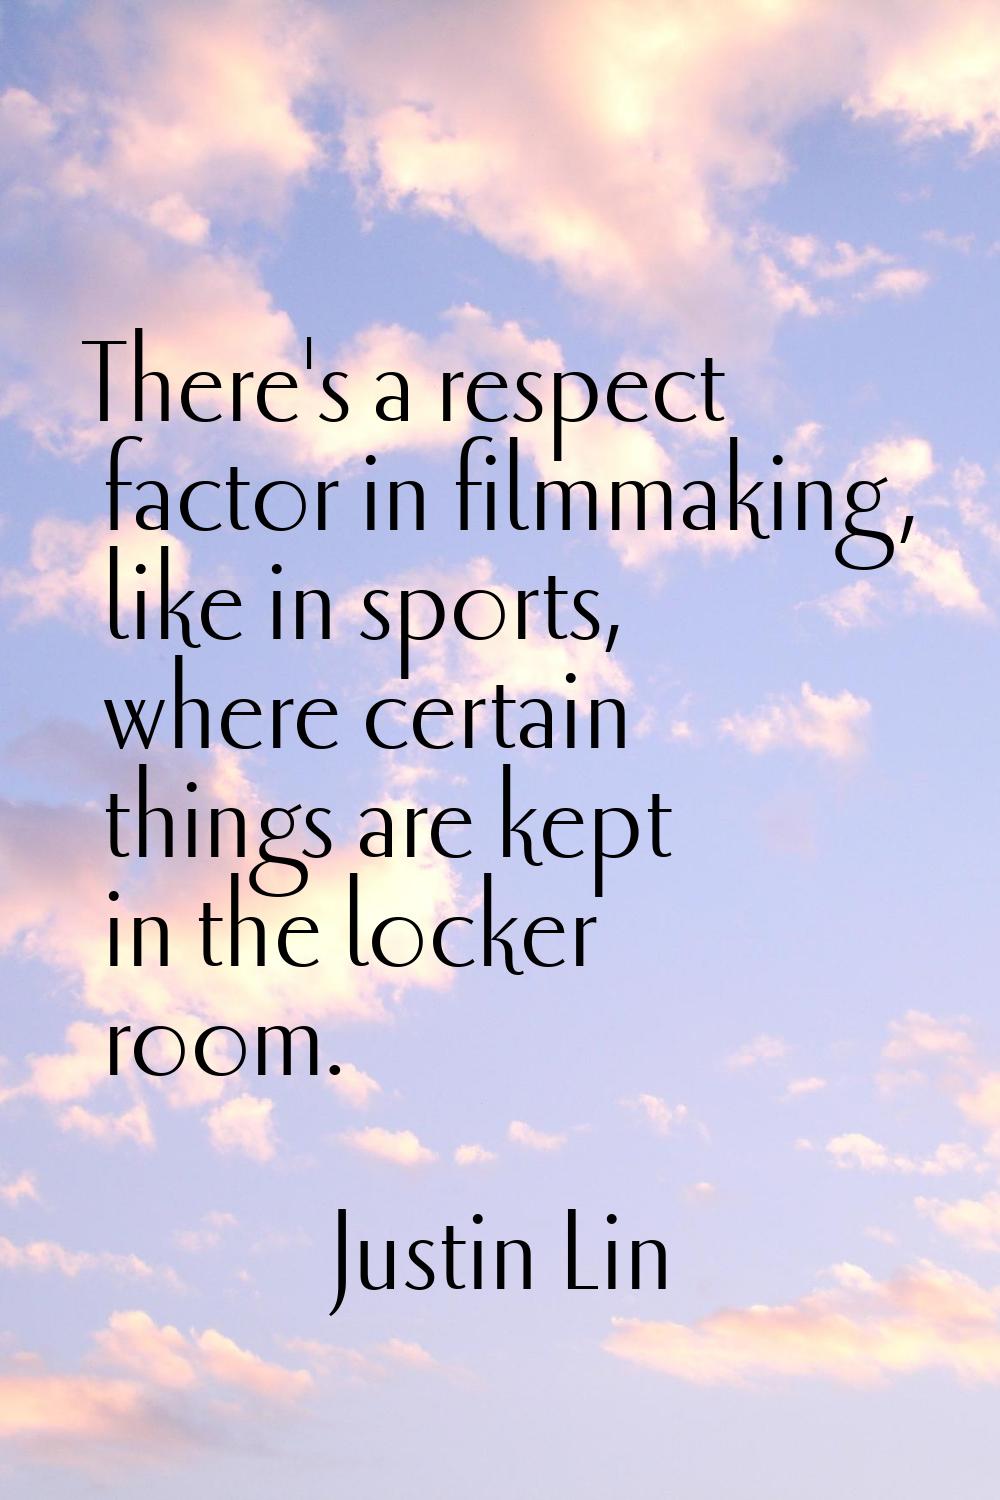 There's a respect factor in filmmaking, like in sports, where certain things are kept in the locker